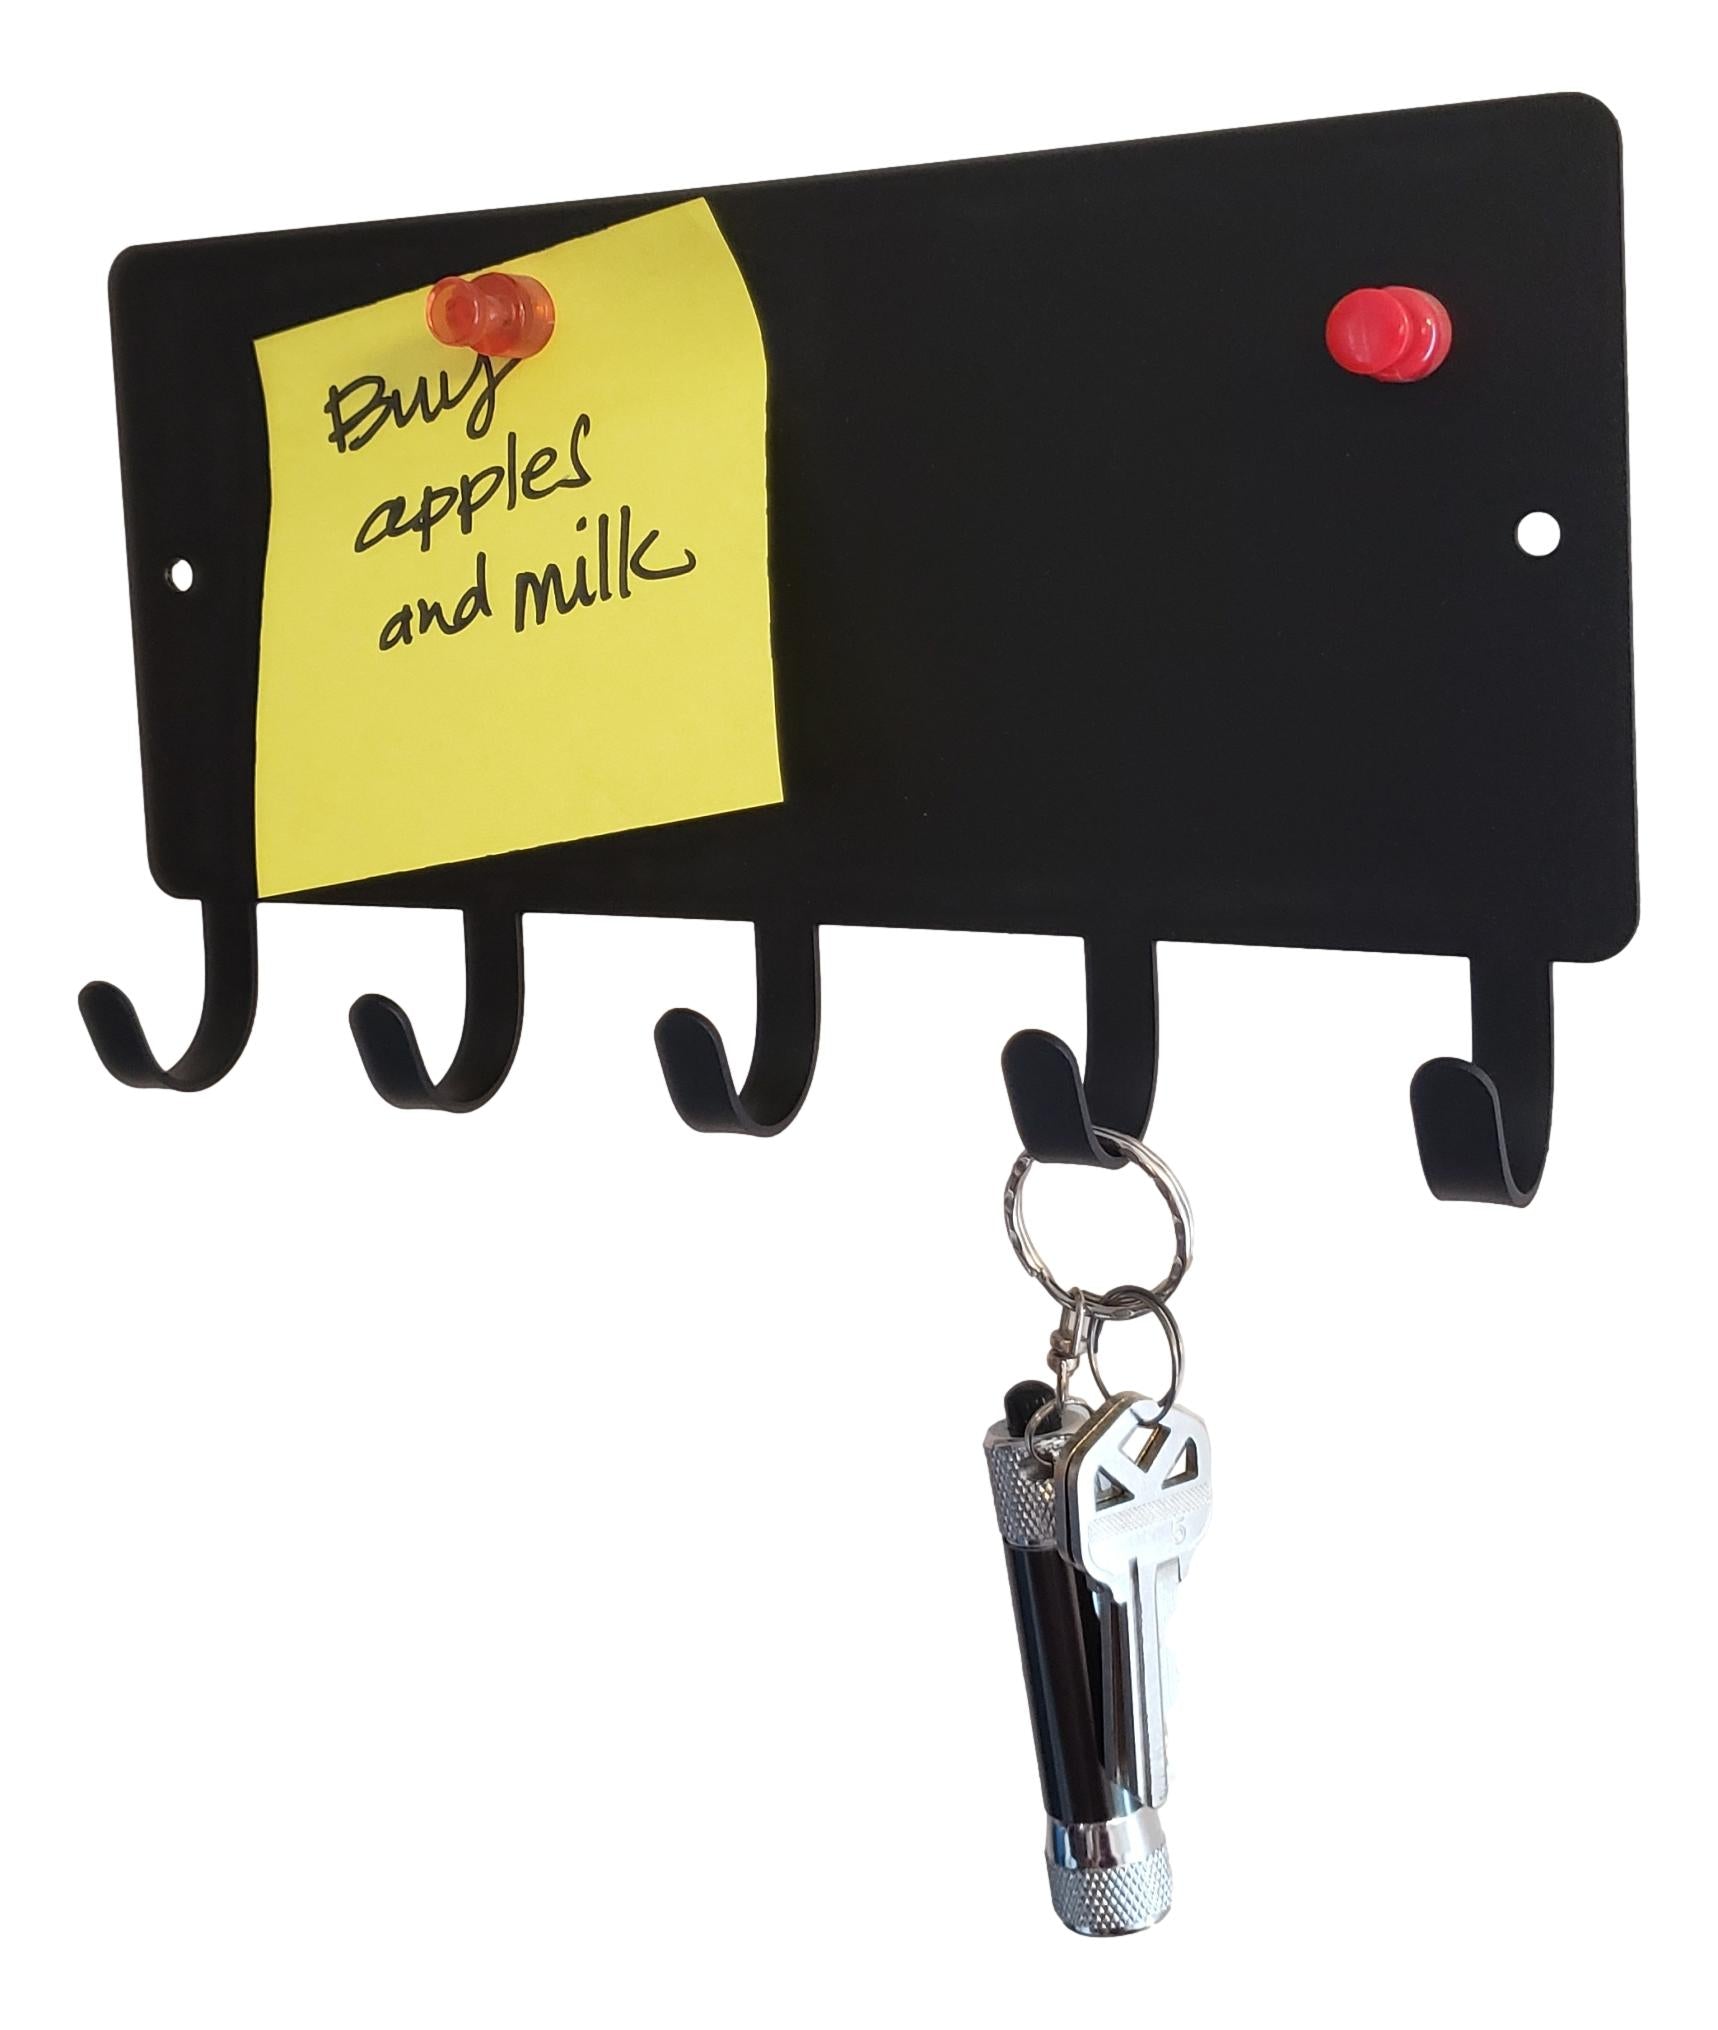 A simple key hanger with a section for adding memo notes with magnets